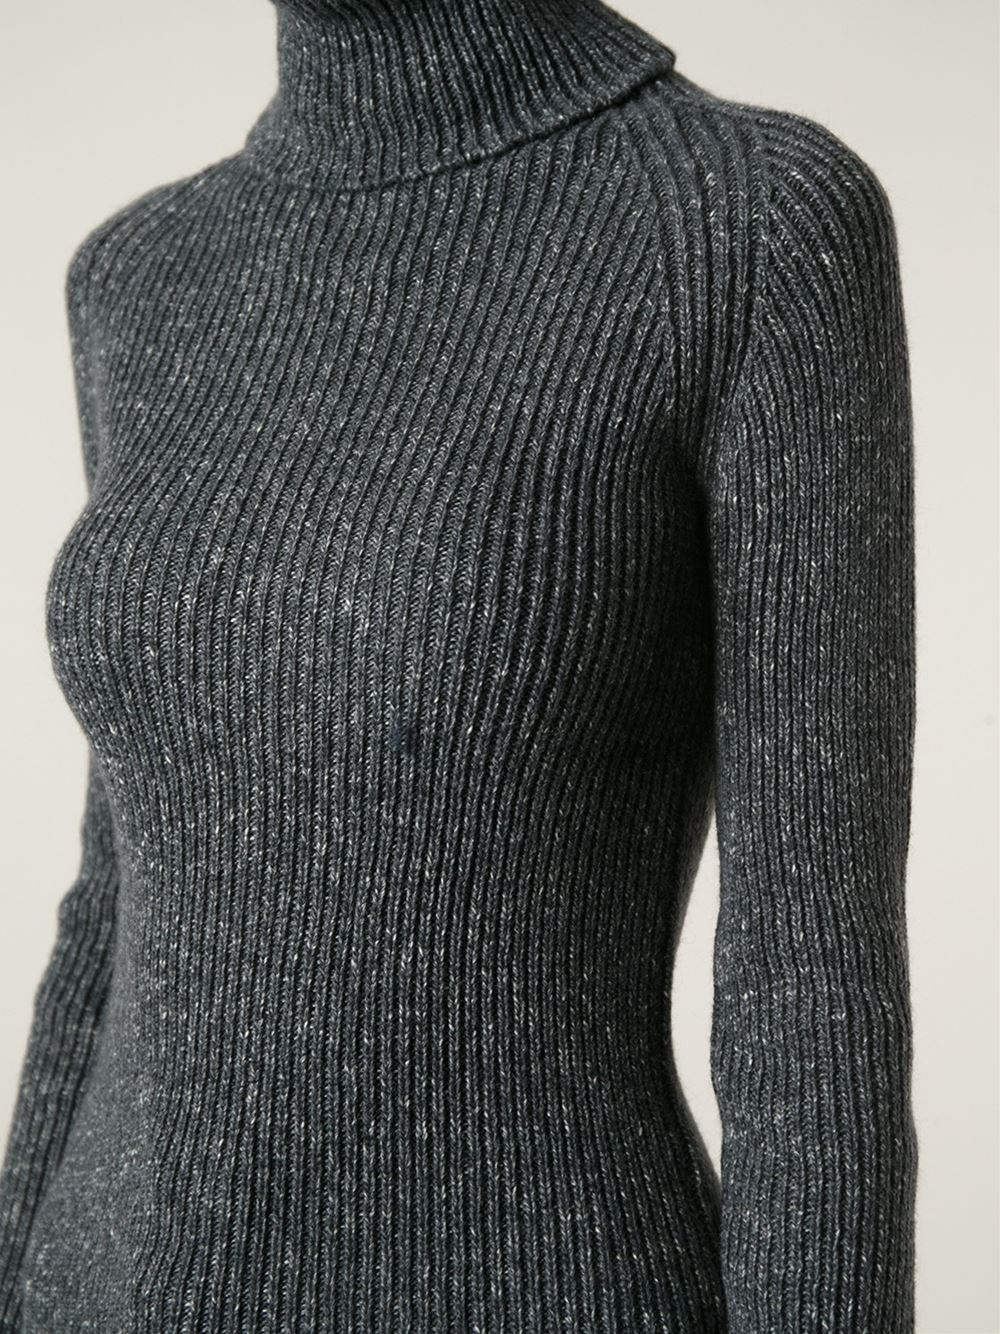 Anthony vaccarello Ribbed Turtleneck Sweater in Gray | Lyst